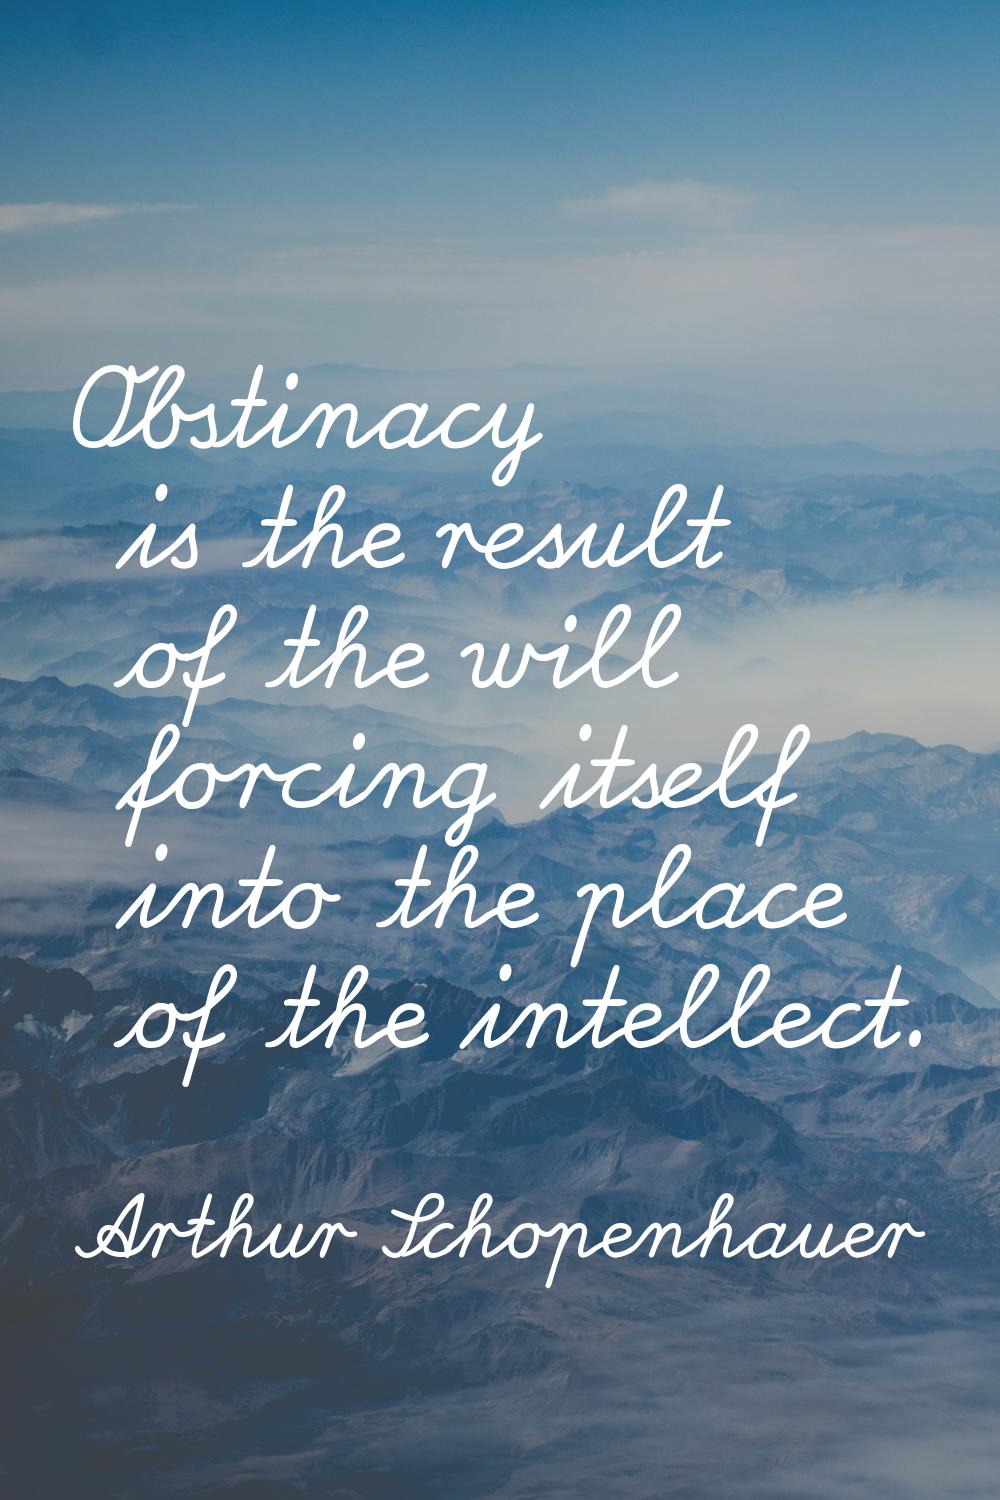 Obstinacy is the result of the will forcing itself into the place of the intellect.